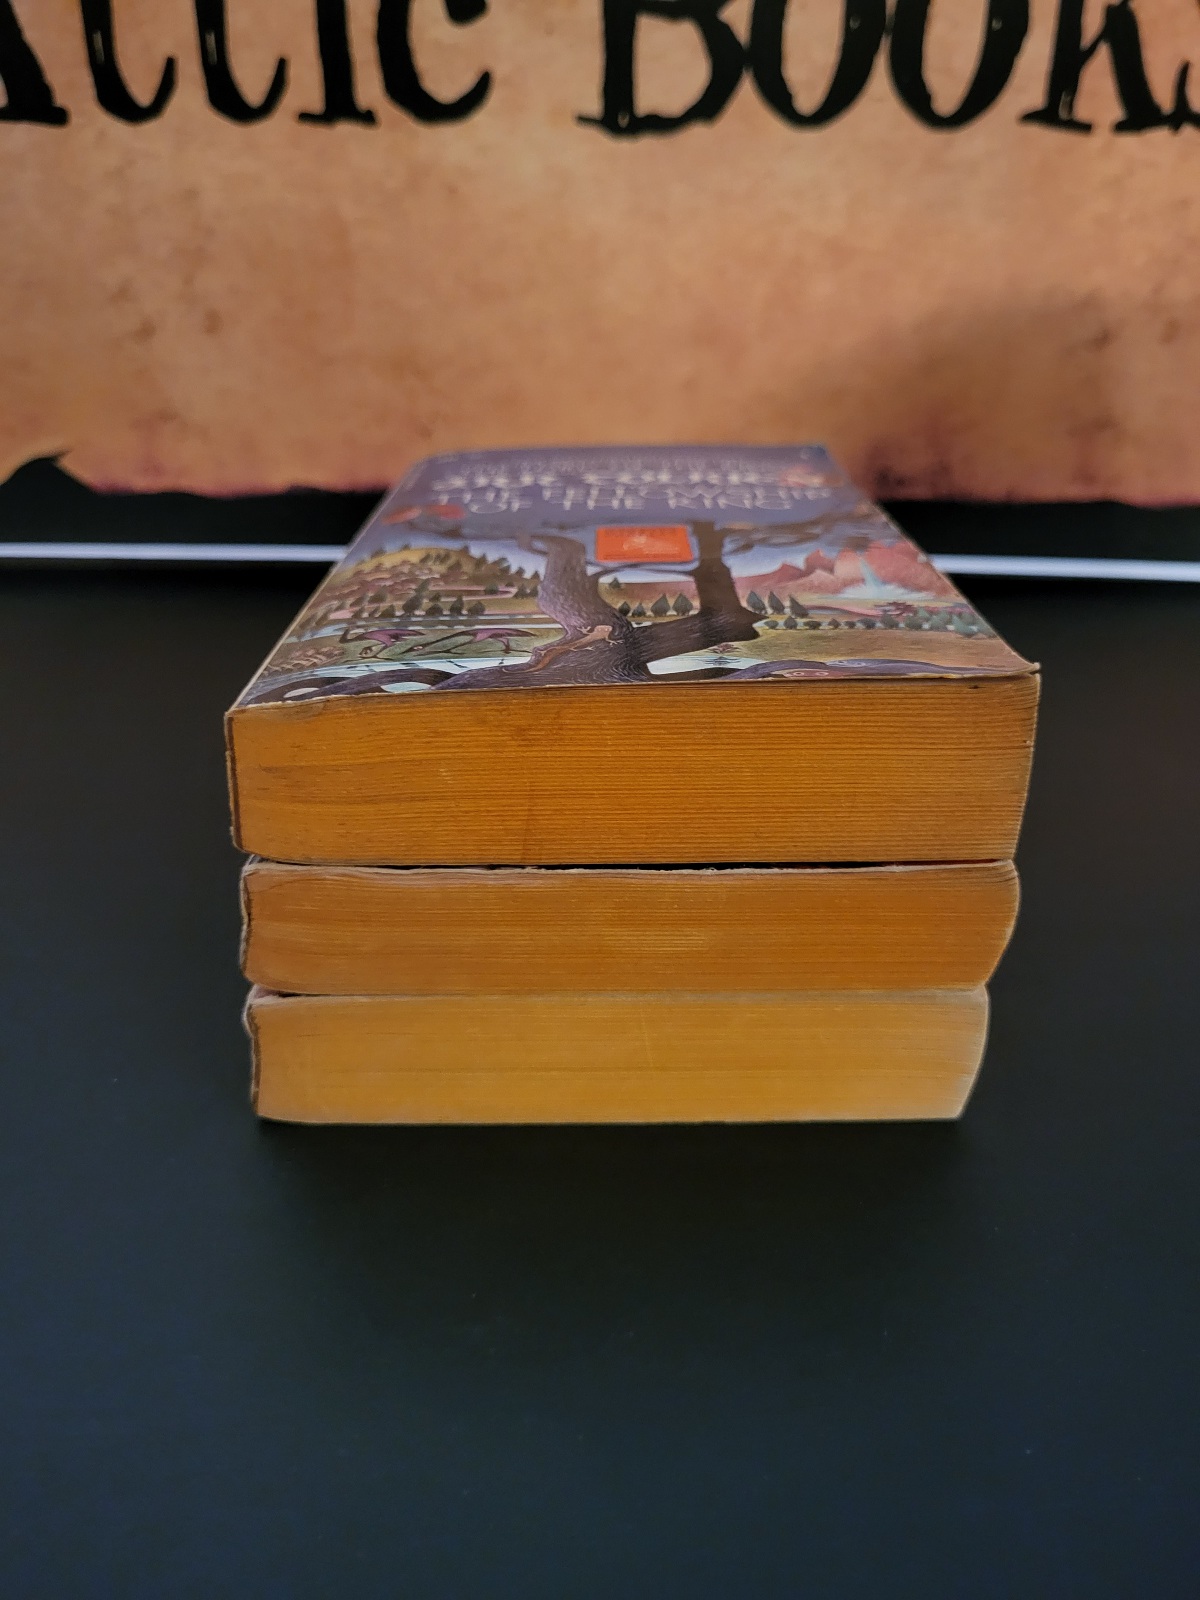 The Lord of the Rings Trilogy in Custom Slipcase Ballantine Books